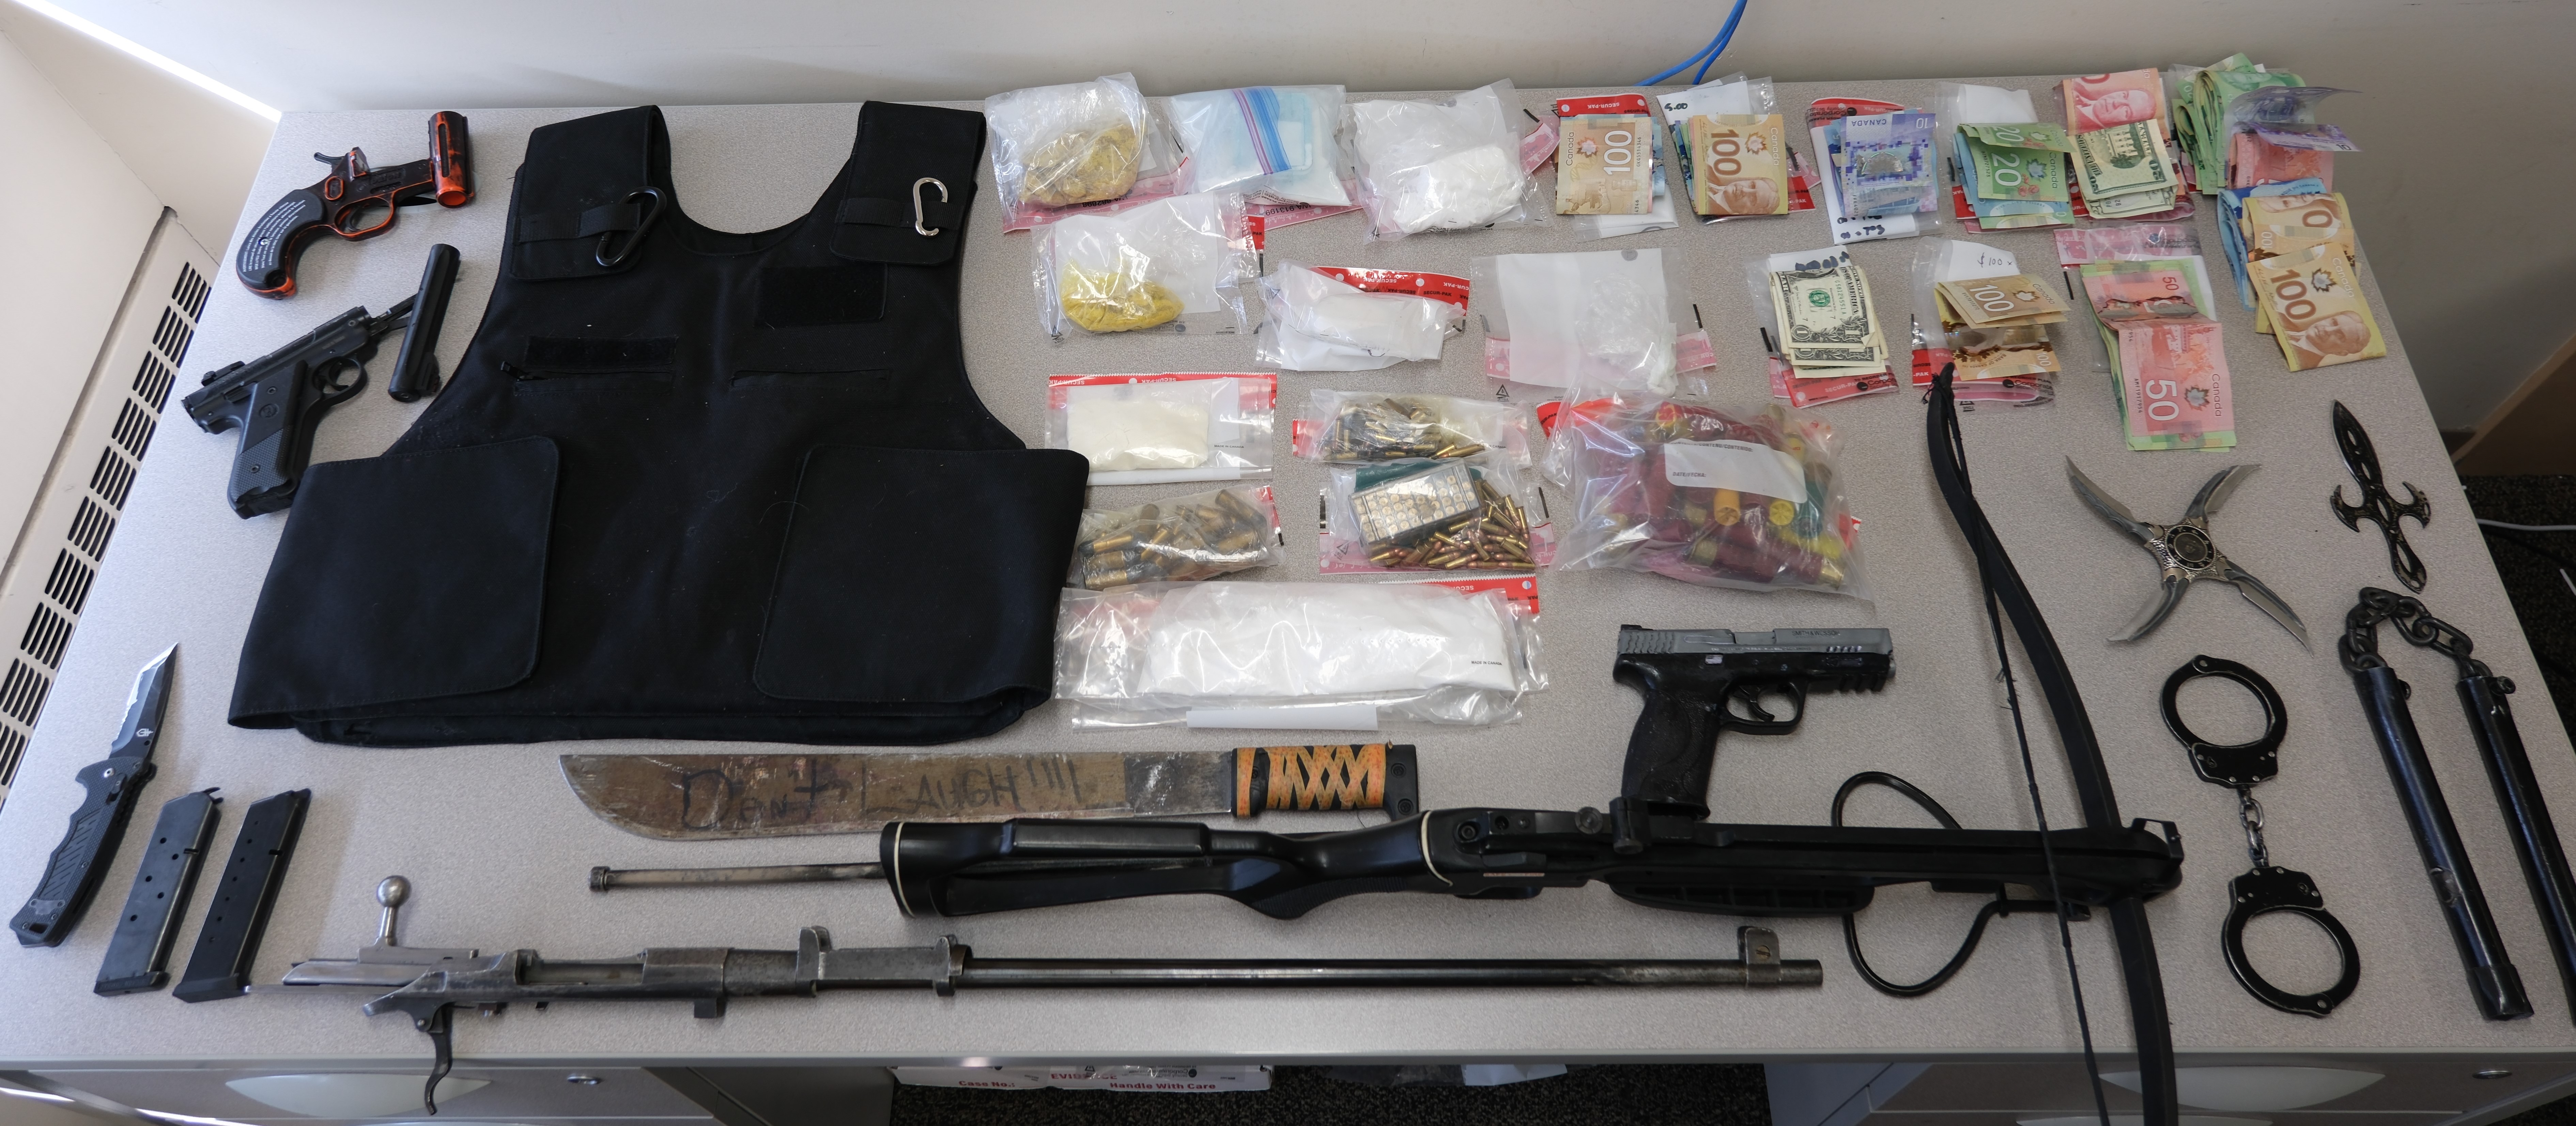 items seized during warrant